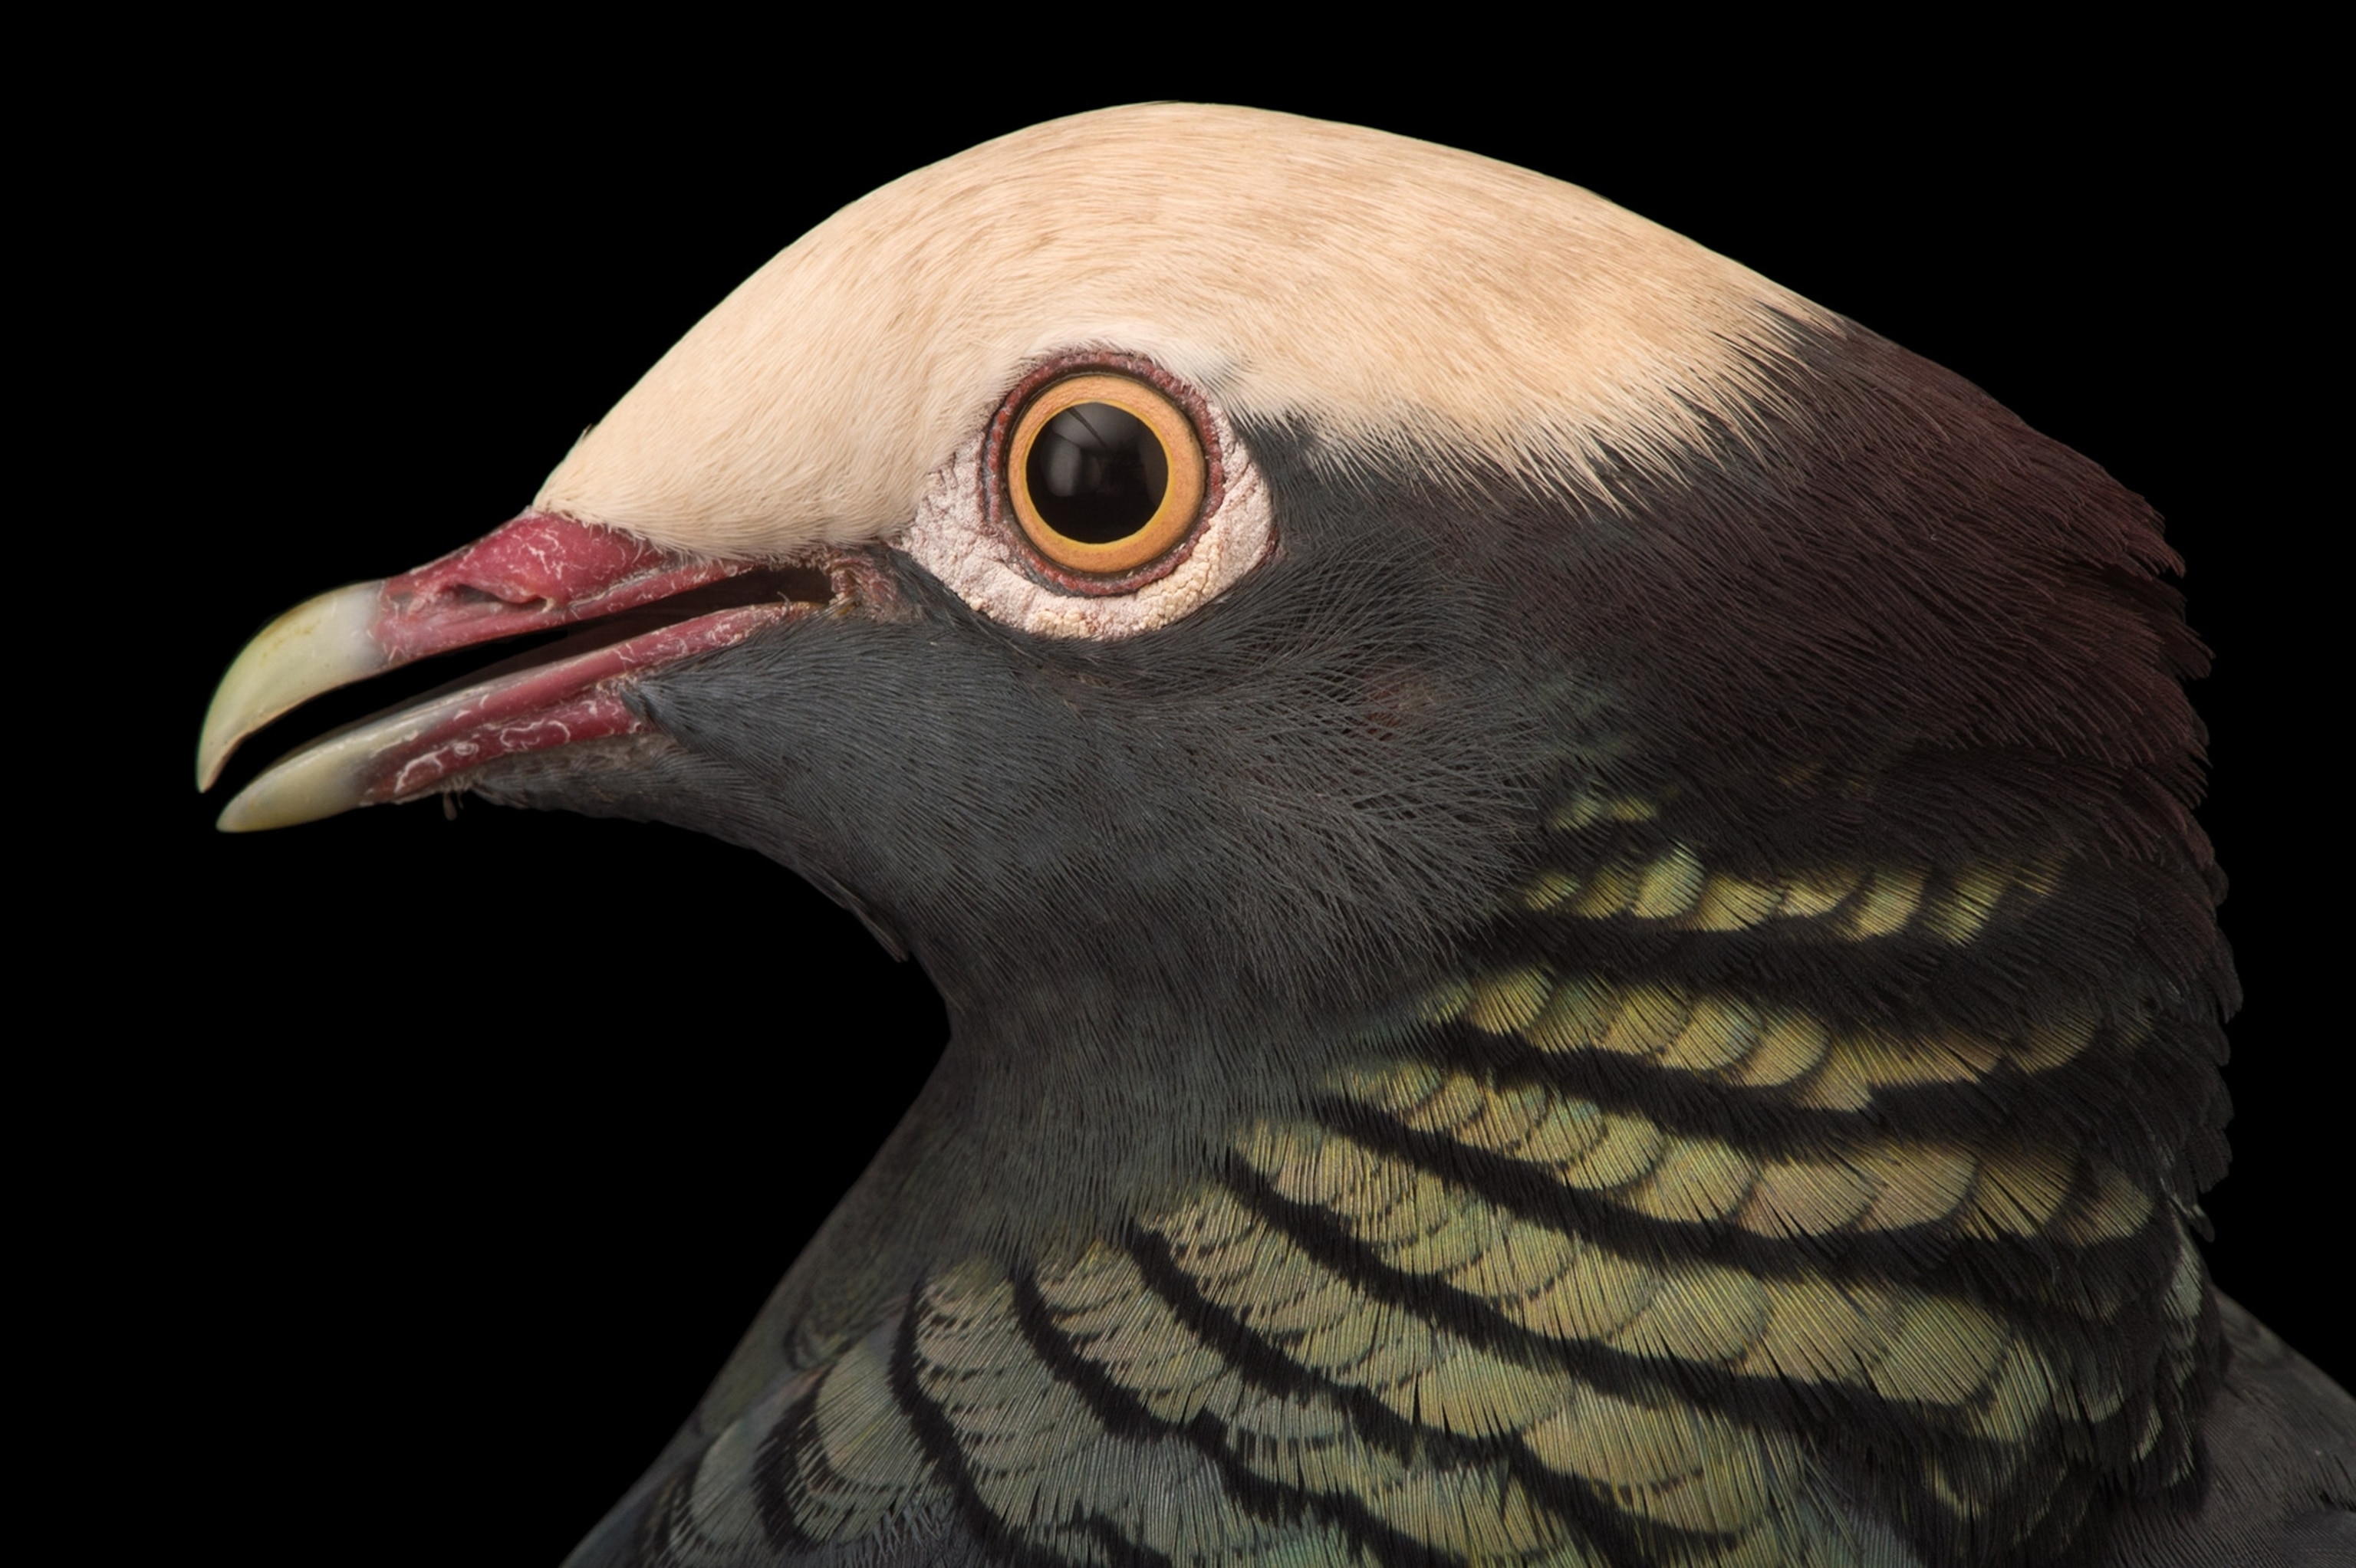 Studio photograph of a white crowned pigeon